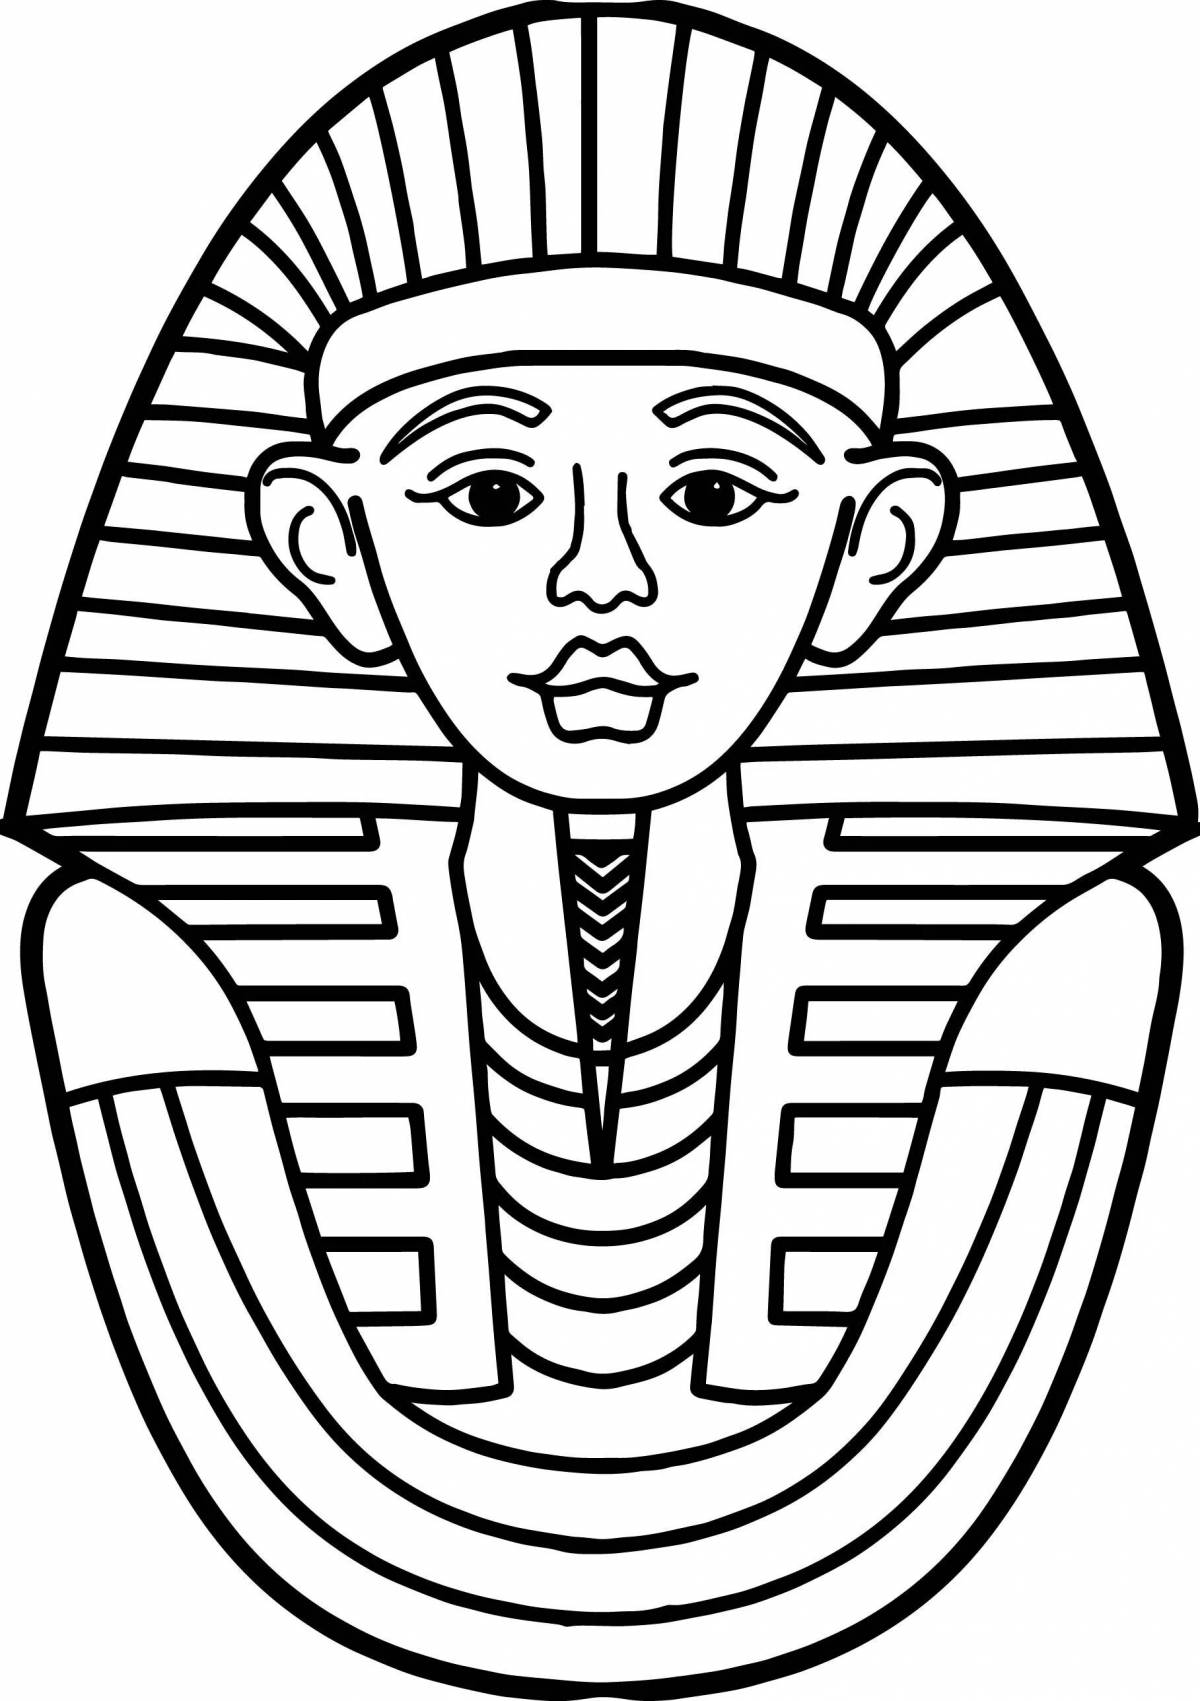 Dazzling ancient egypt coloring book for kids